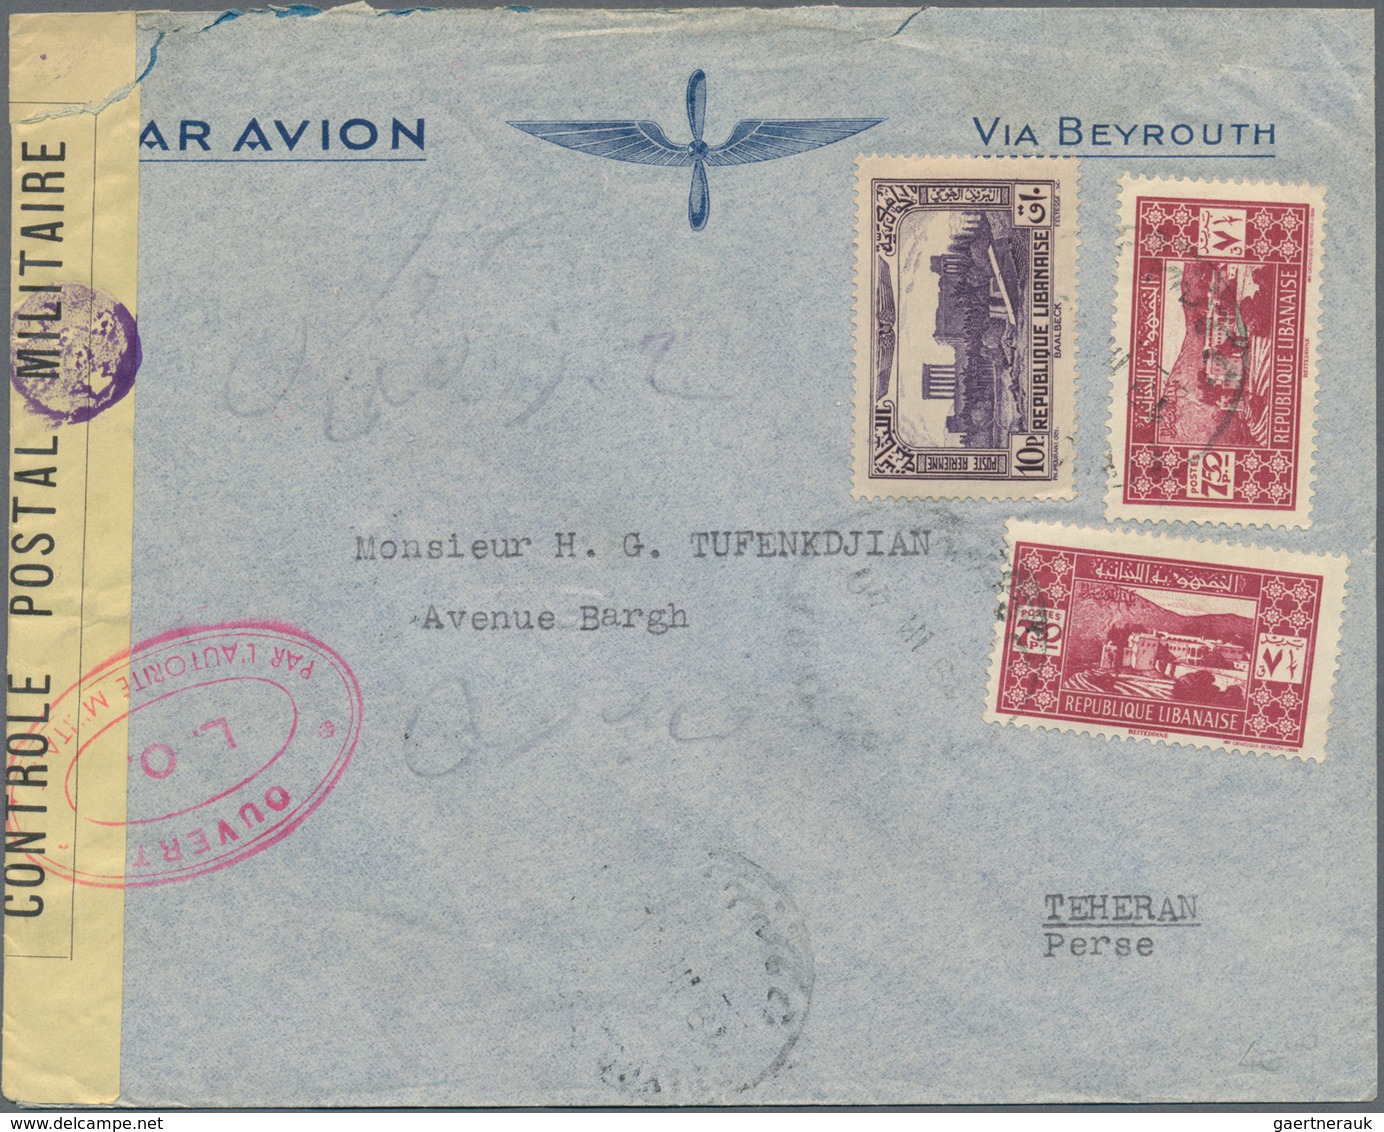 Asien: 1900/1970 (ca.), comprehensive holding of covers/cards, comprising Cambodia, Laos, Iran, Leba